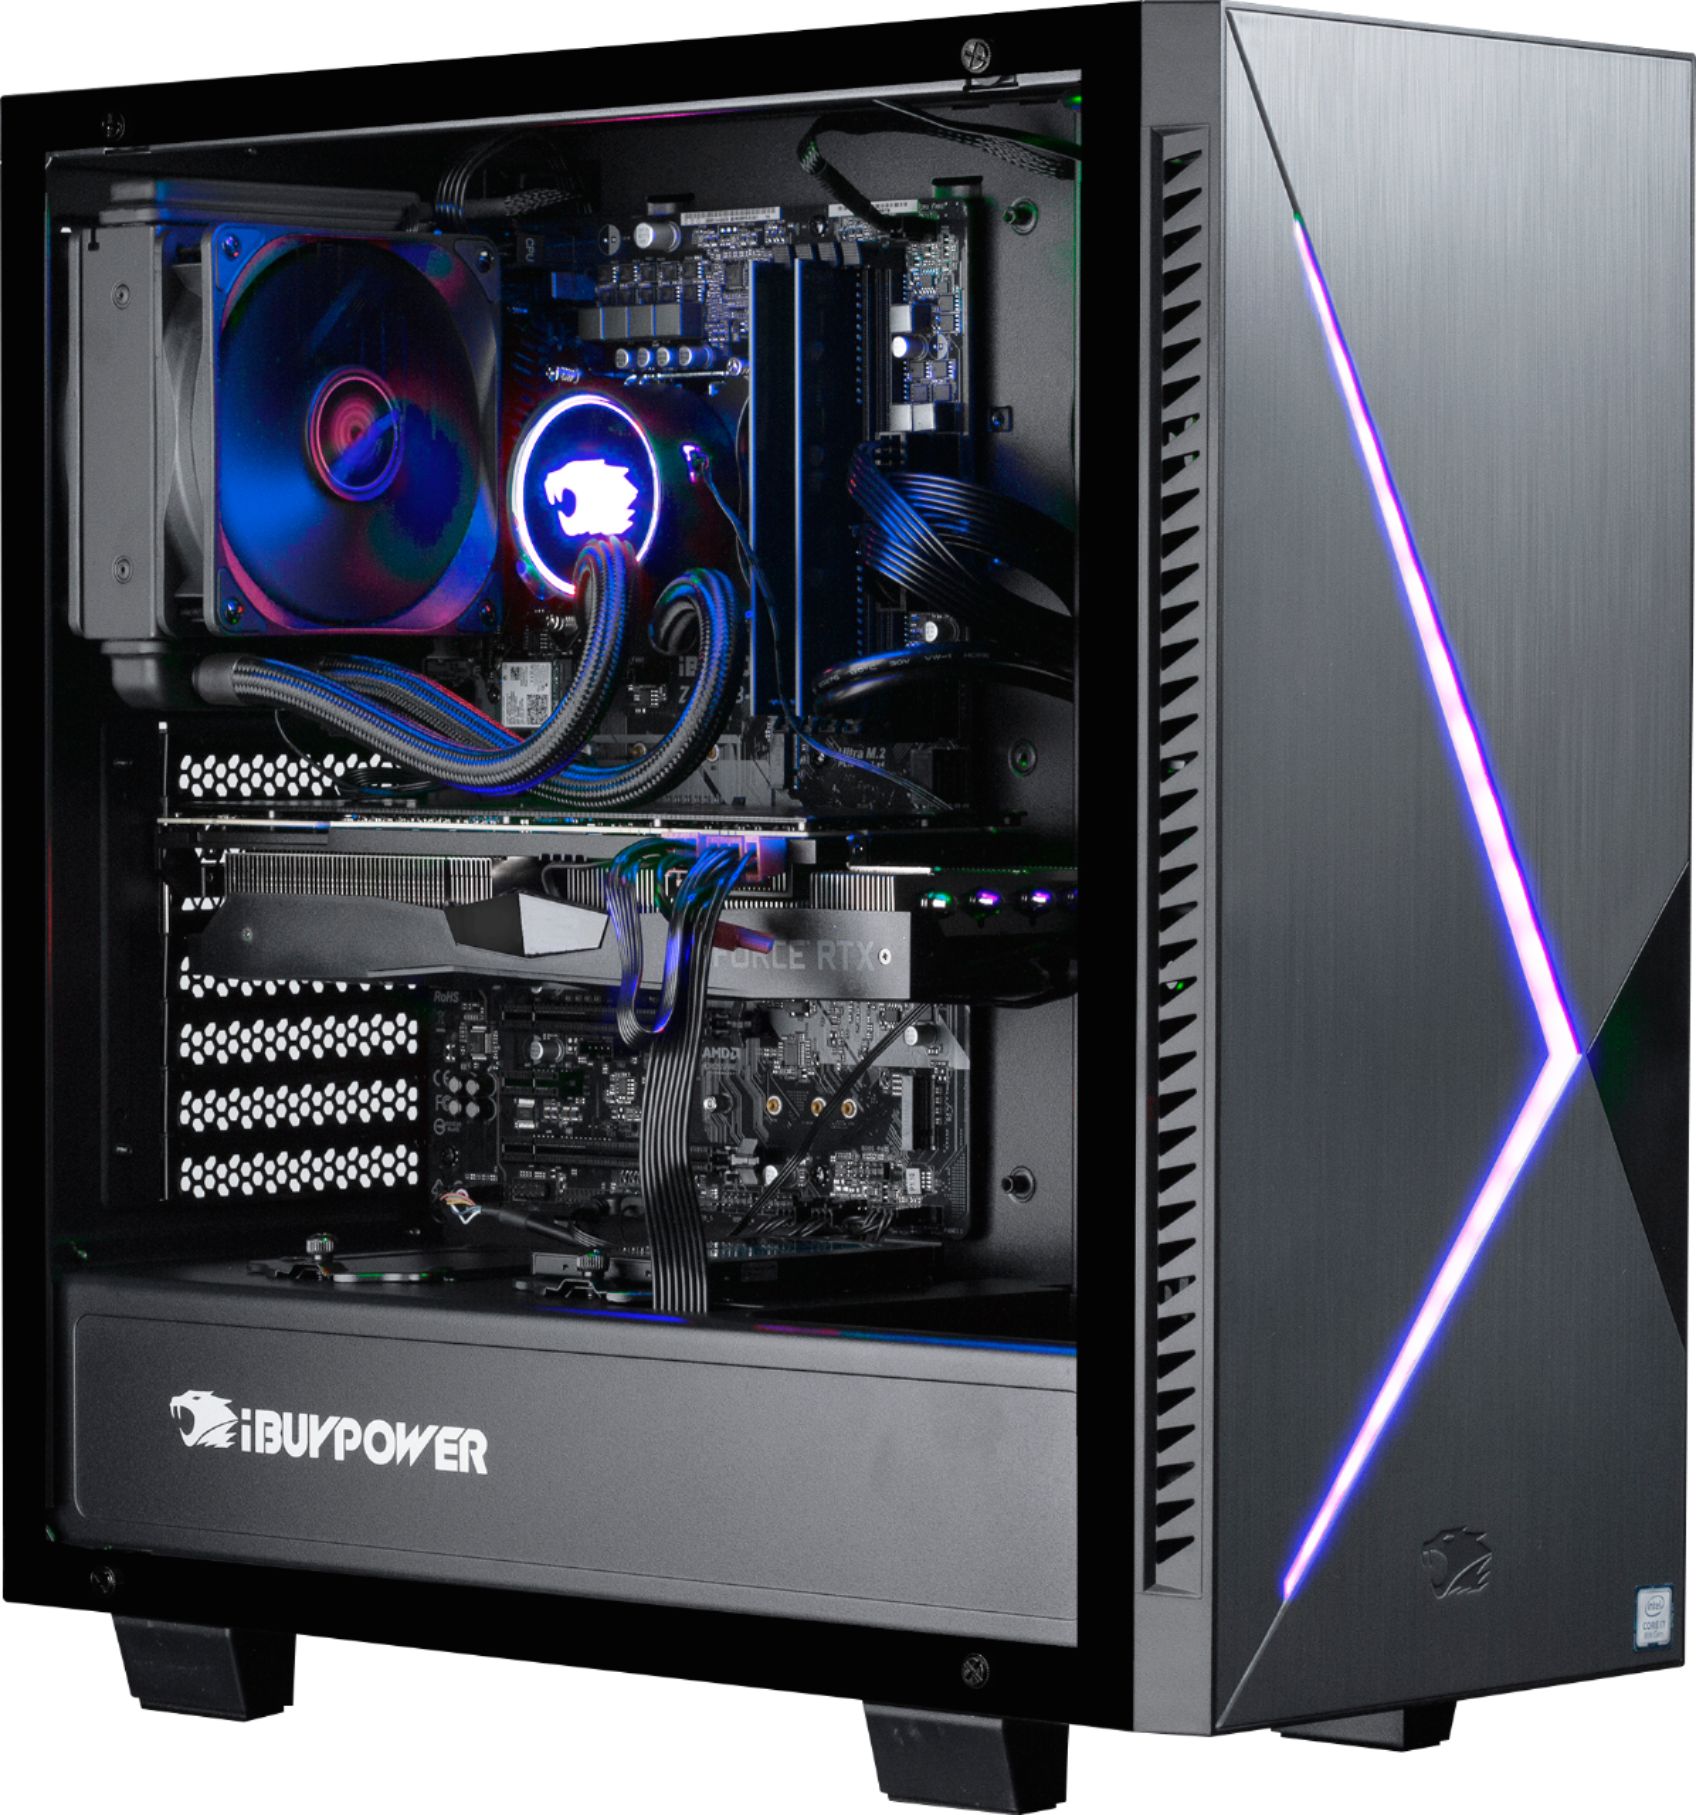 Gaming Powerhouse: Discover the Top Gaming PCs by theitgear on